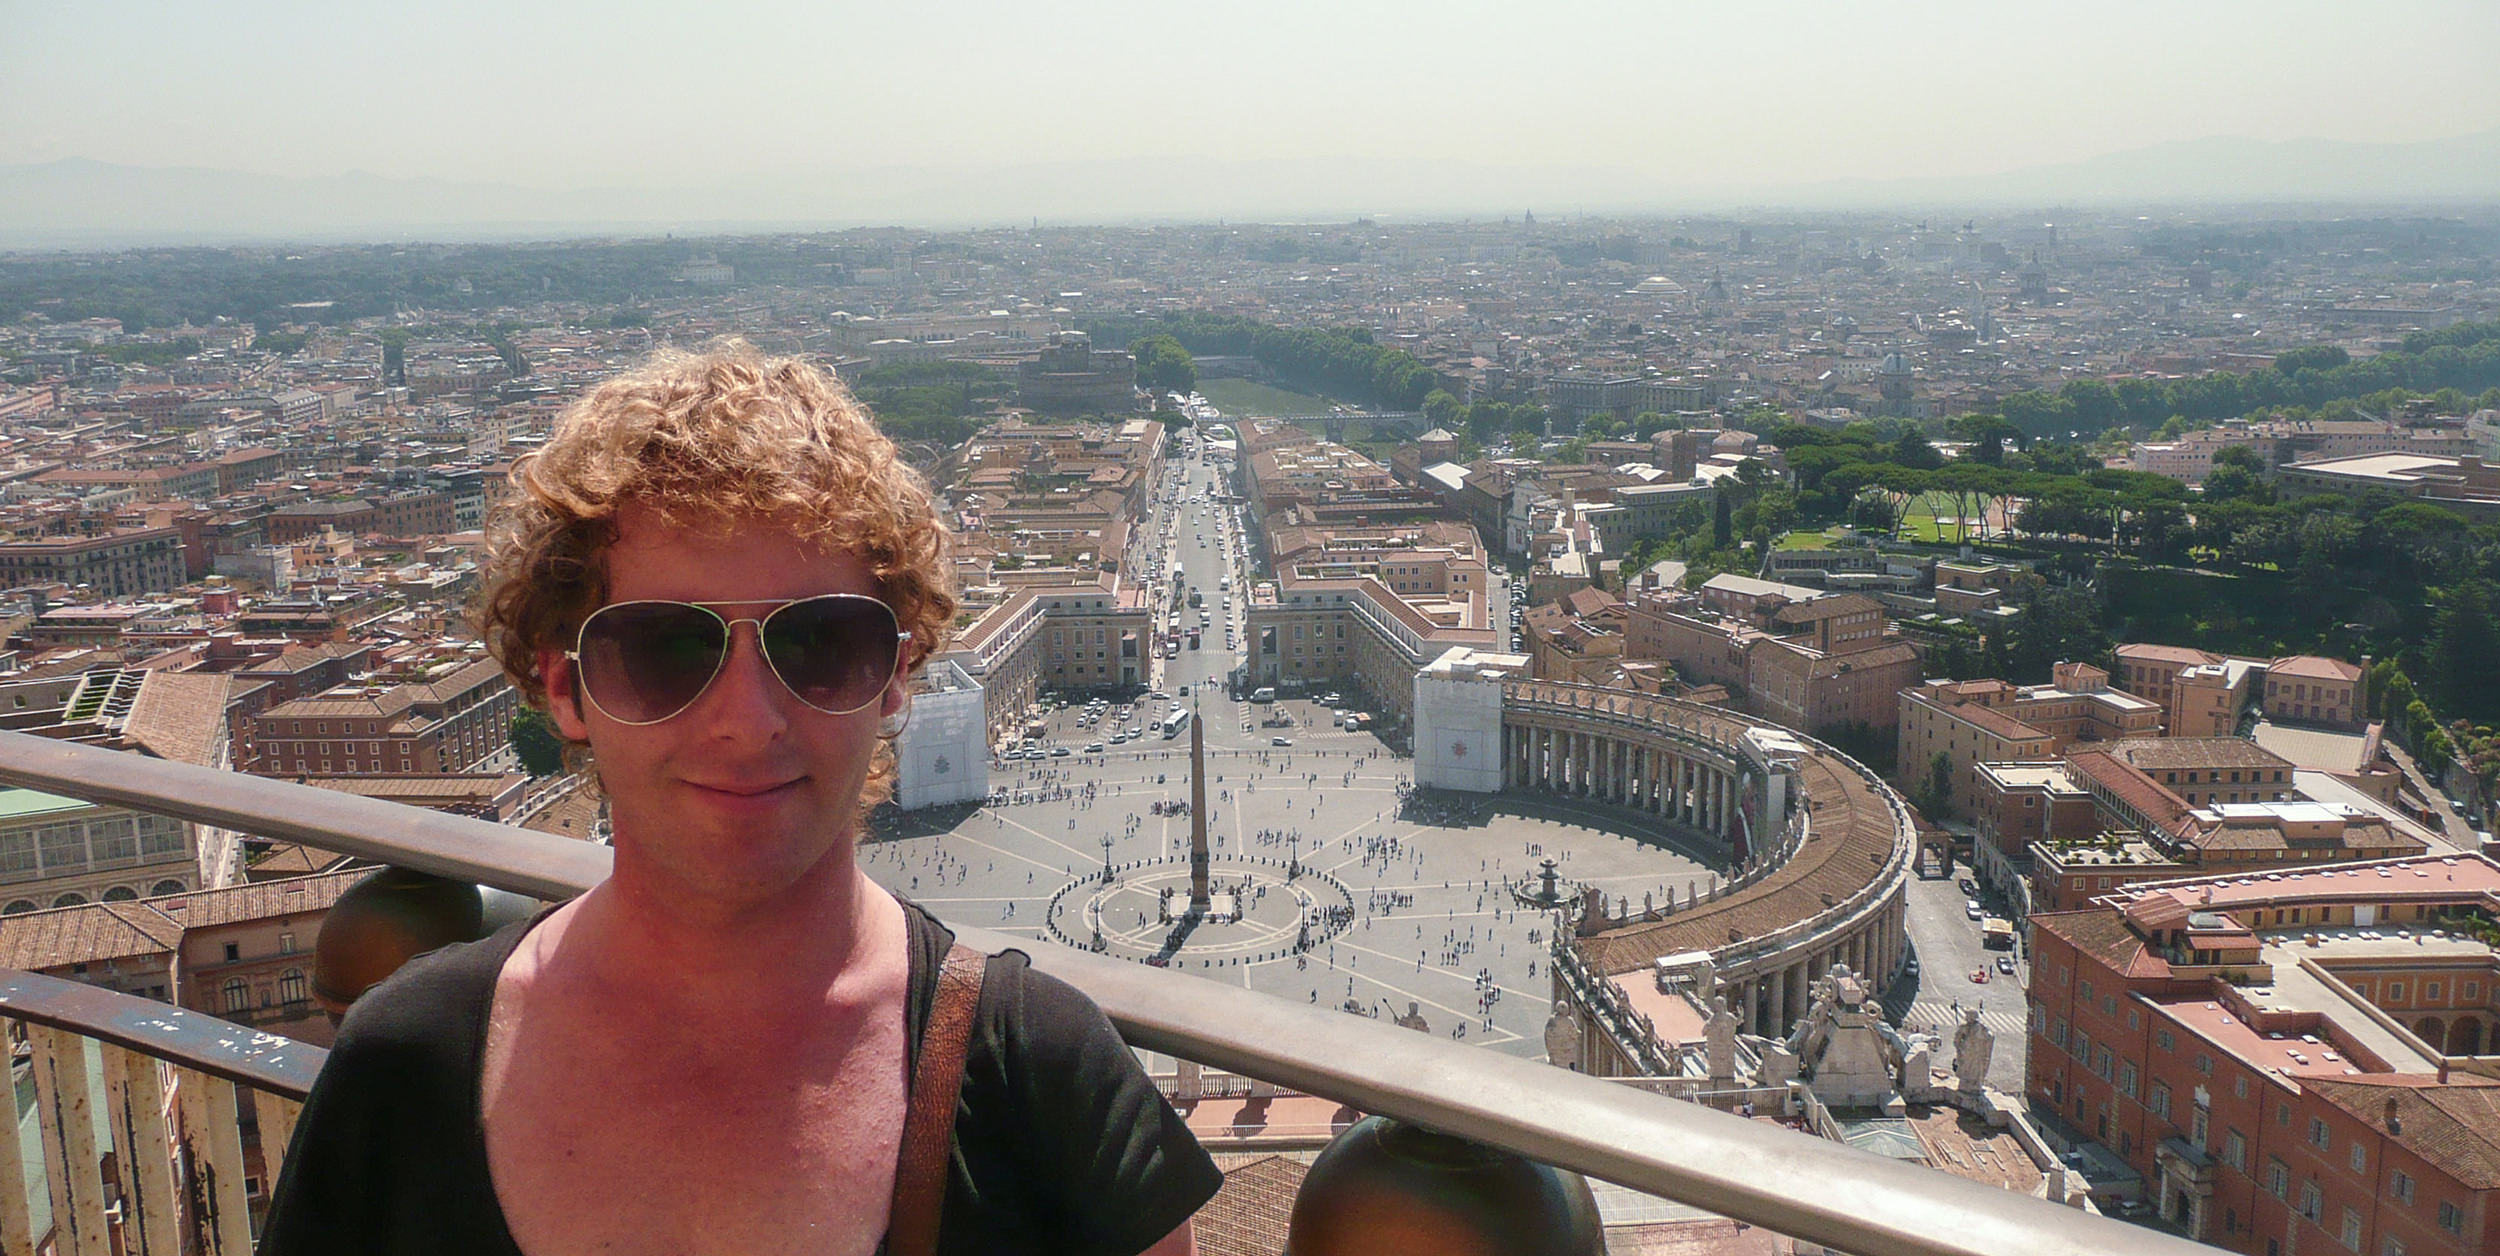 Ben standing on the Vatican roof with views of Rome